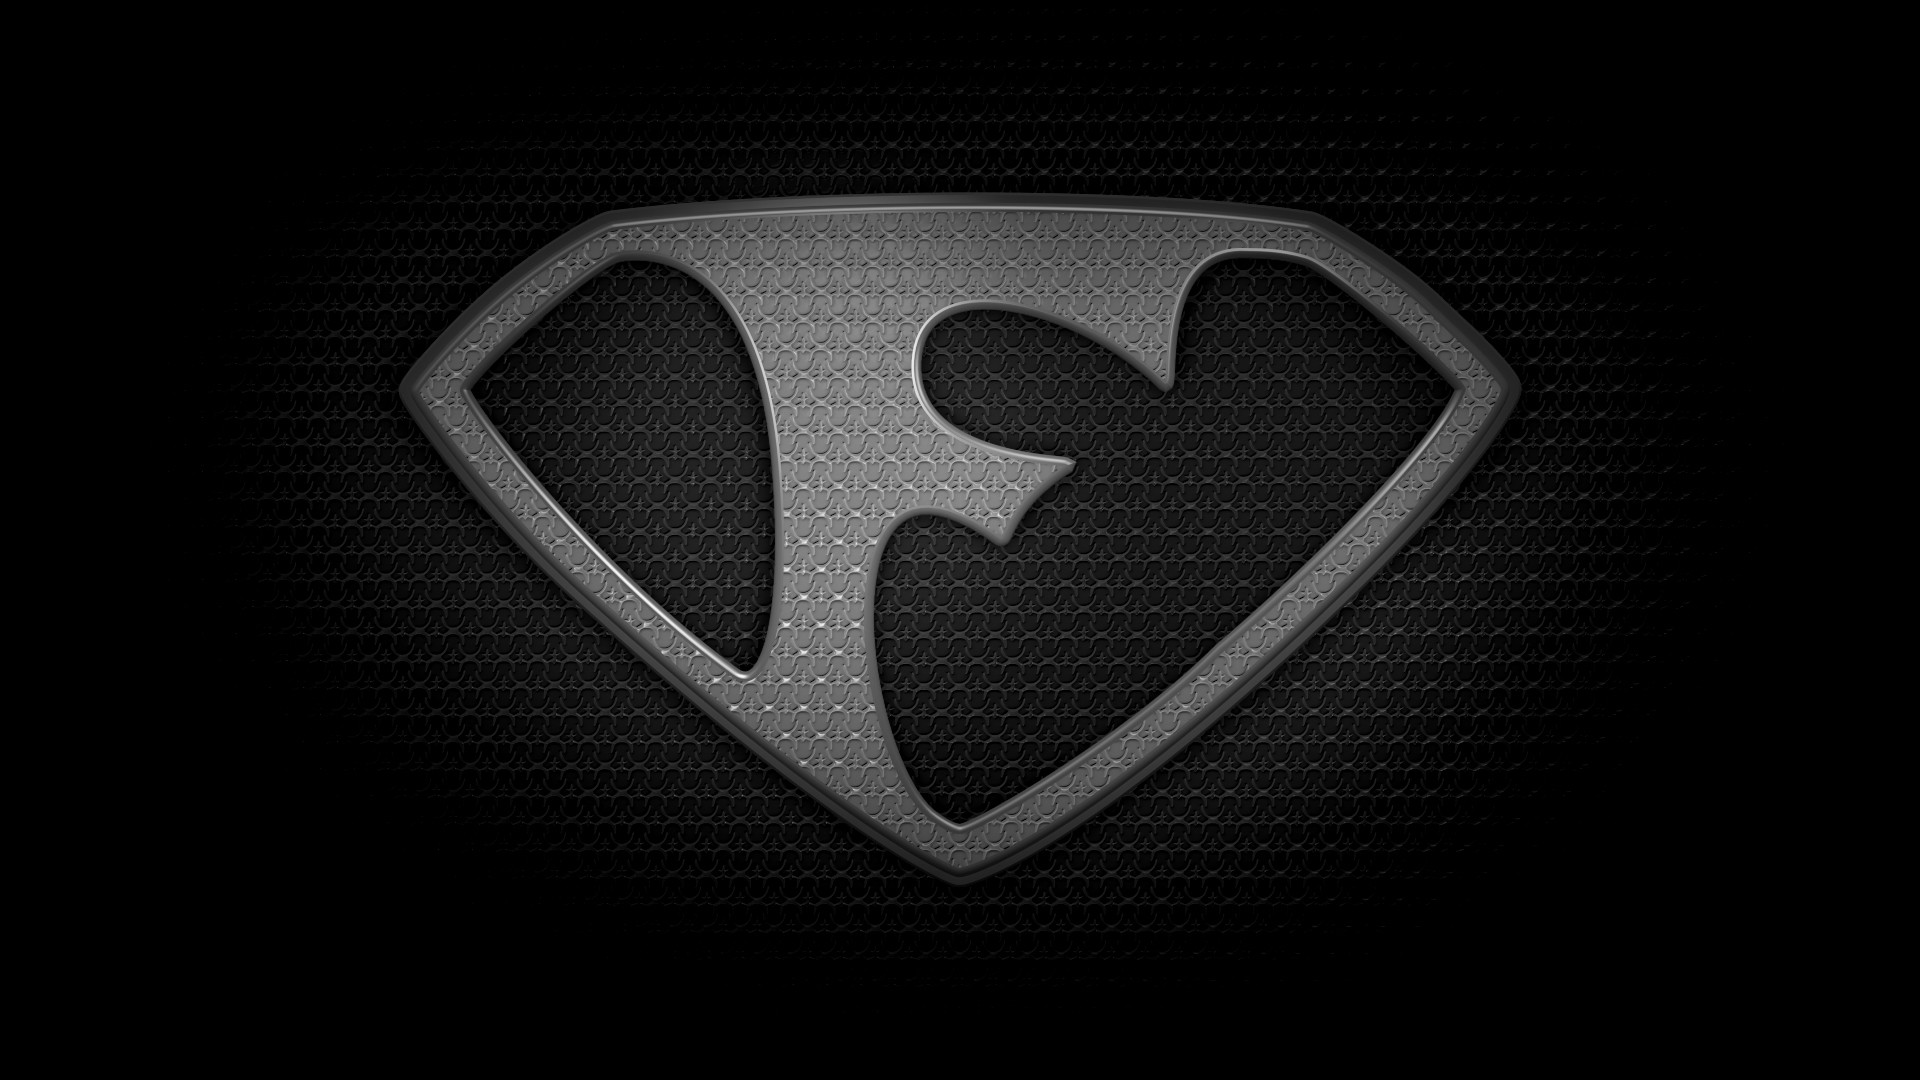 1920x1080 The letter F in the style of the "Man of Steel" movie logo.